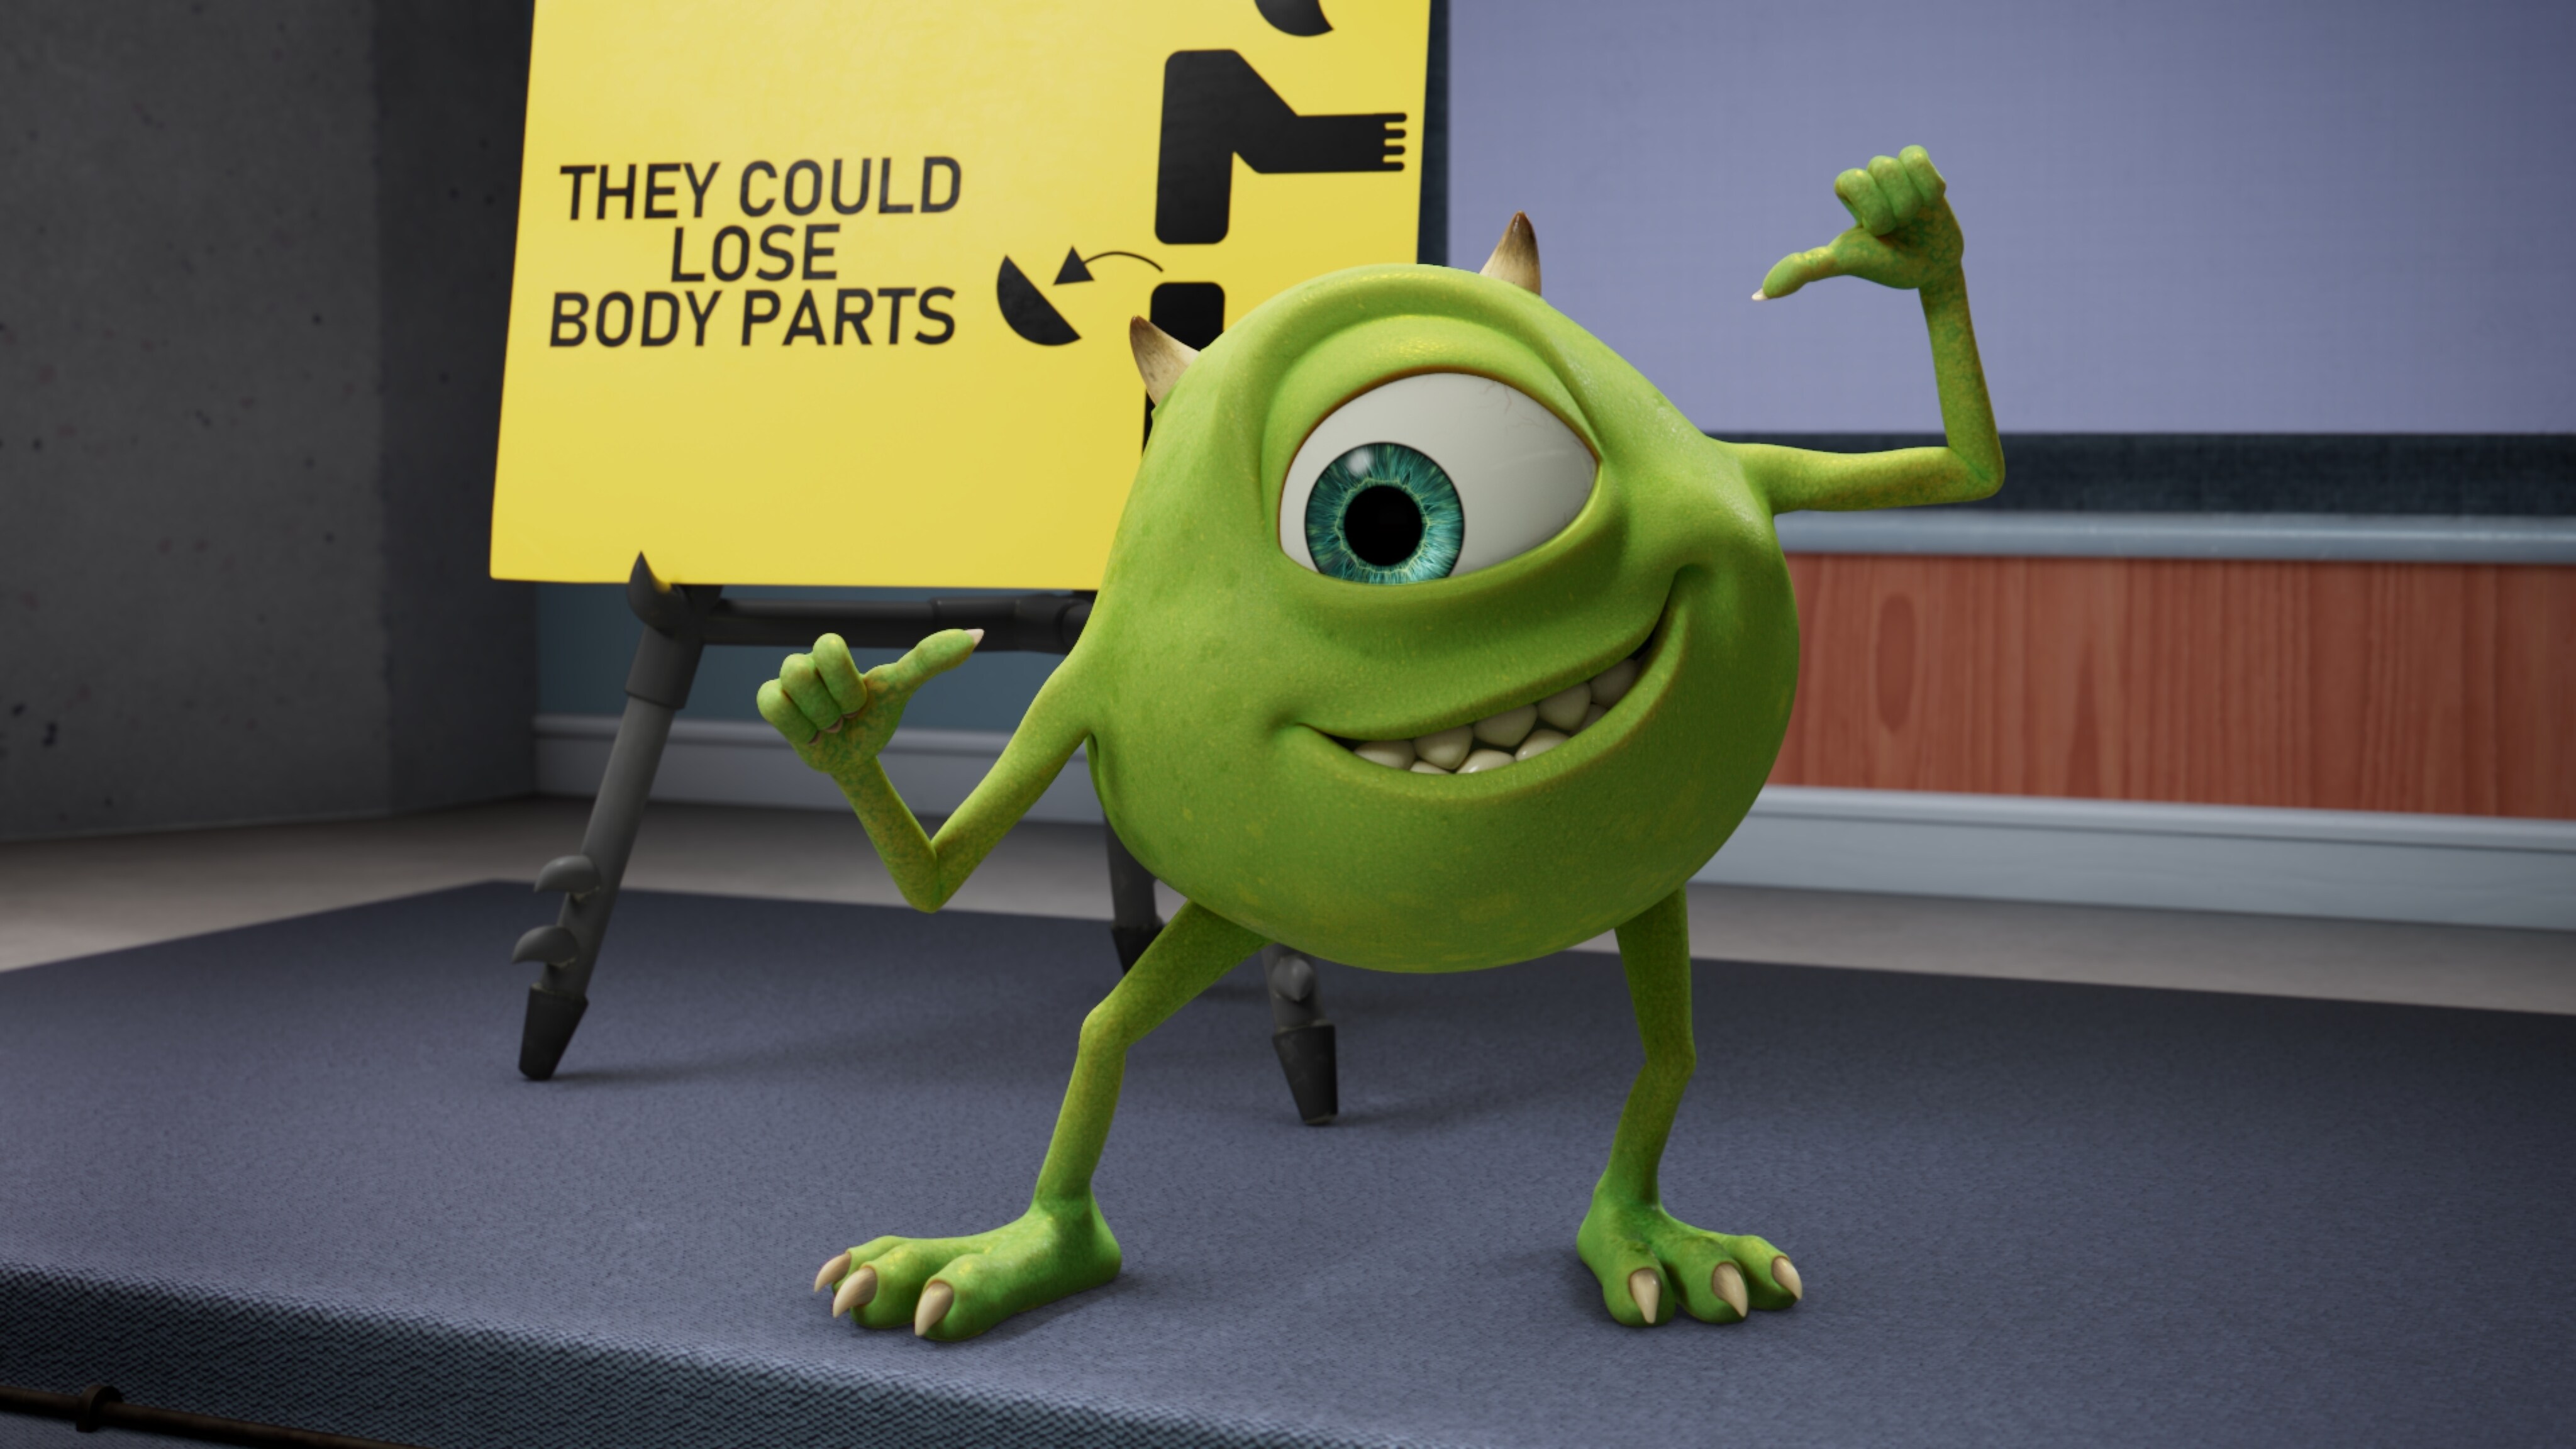 MONSTERS AT WORK - "Meet Mift" - When Tylor is initiated into MIFT during a bizarre ritual, he wants nothing more than to get away from his odd coworkers.  But when an emergency strikes Monsters, Inc., MIFT kicks into action and Tylor develops a hint of respect for the misfit team. (Disney) MIKE